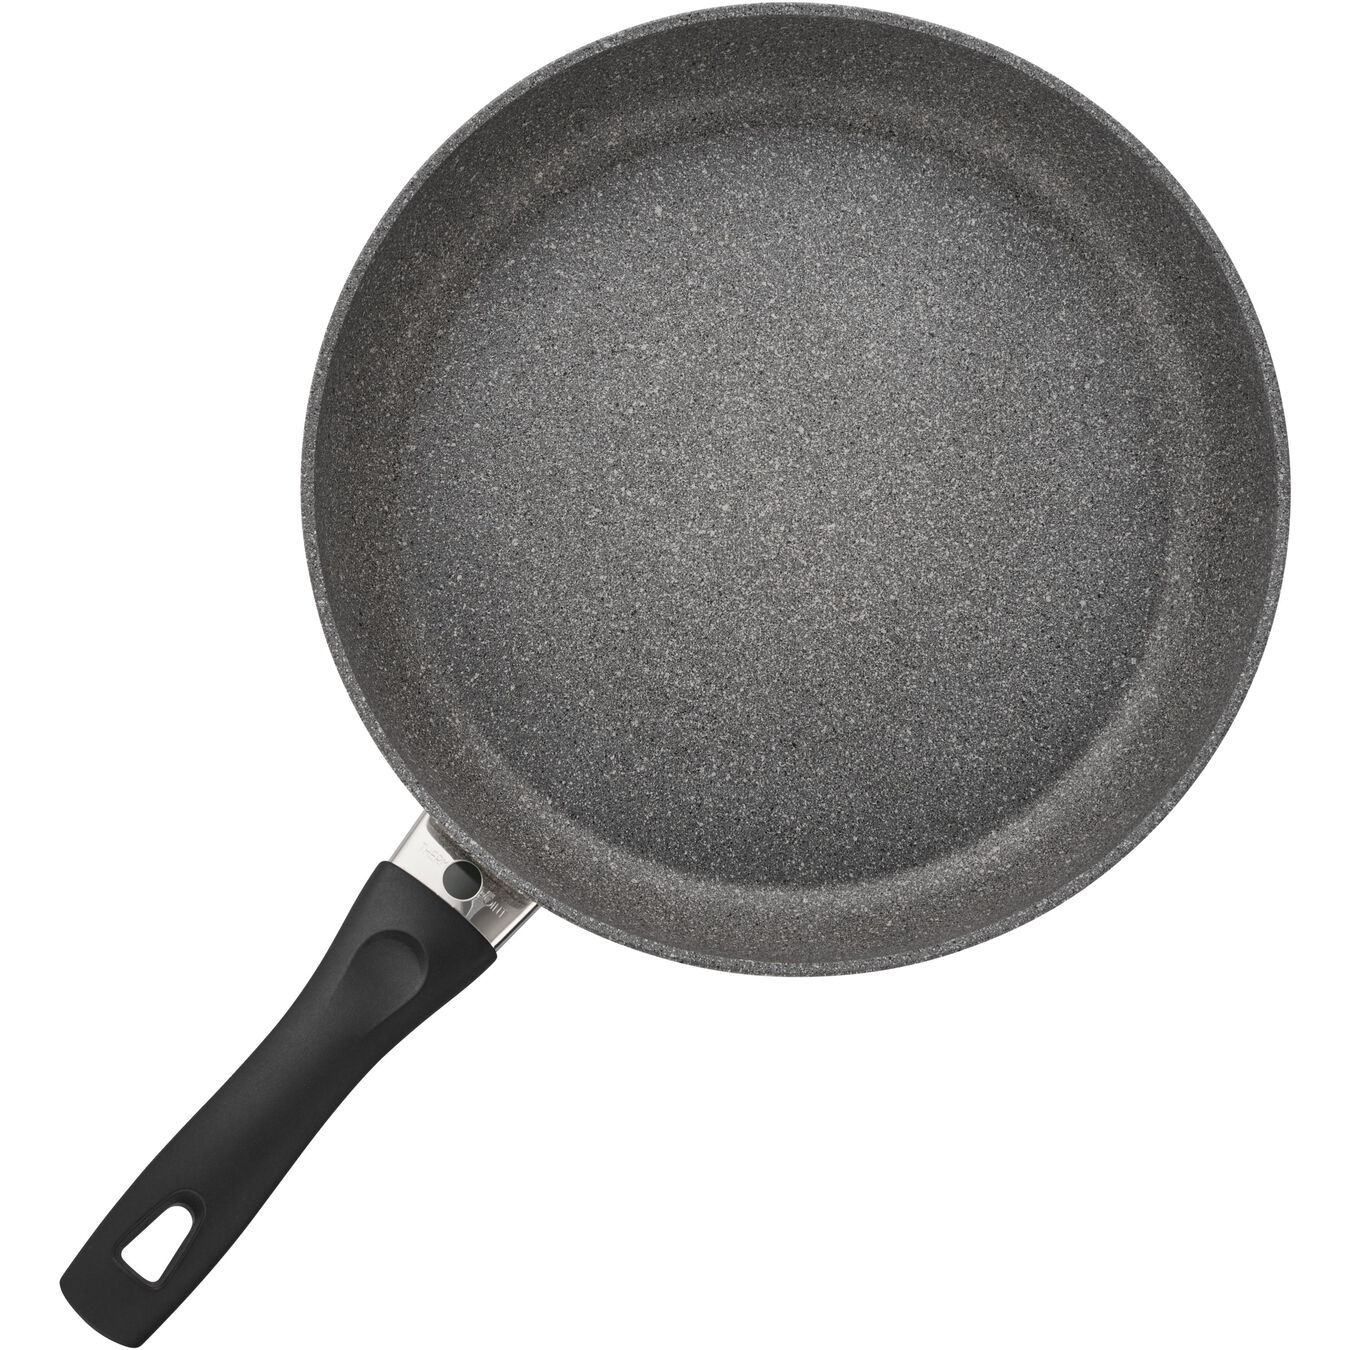 12-inch, Non-stick, Frying pan | The ZWILLING Group Cutlery & Cookware